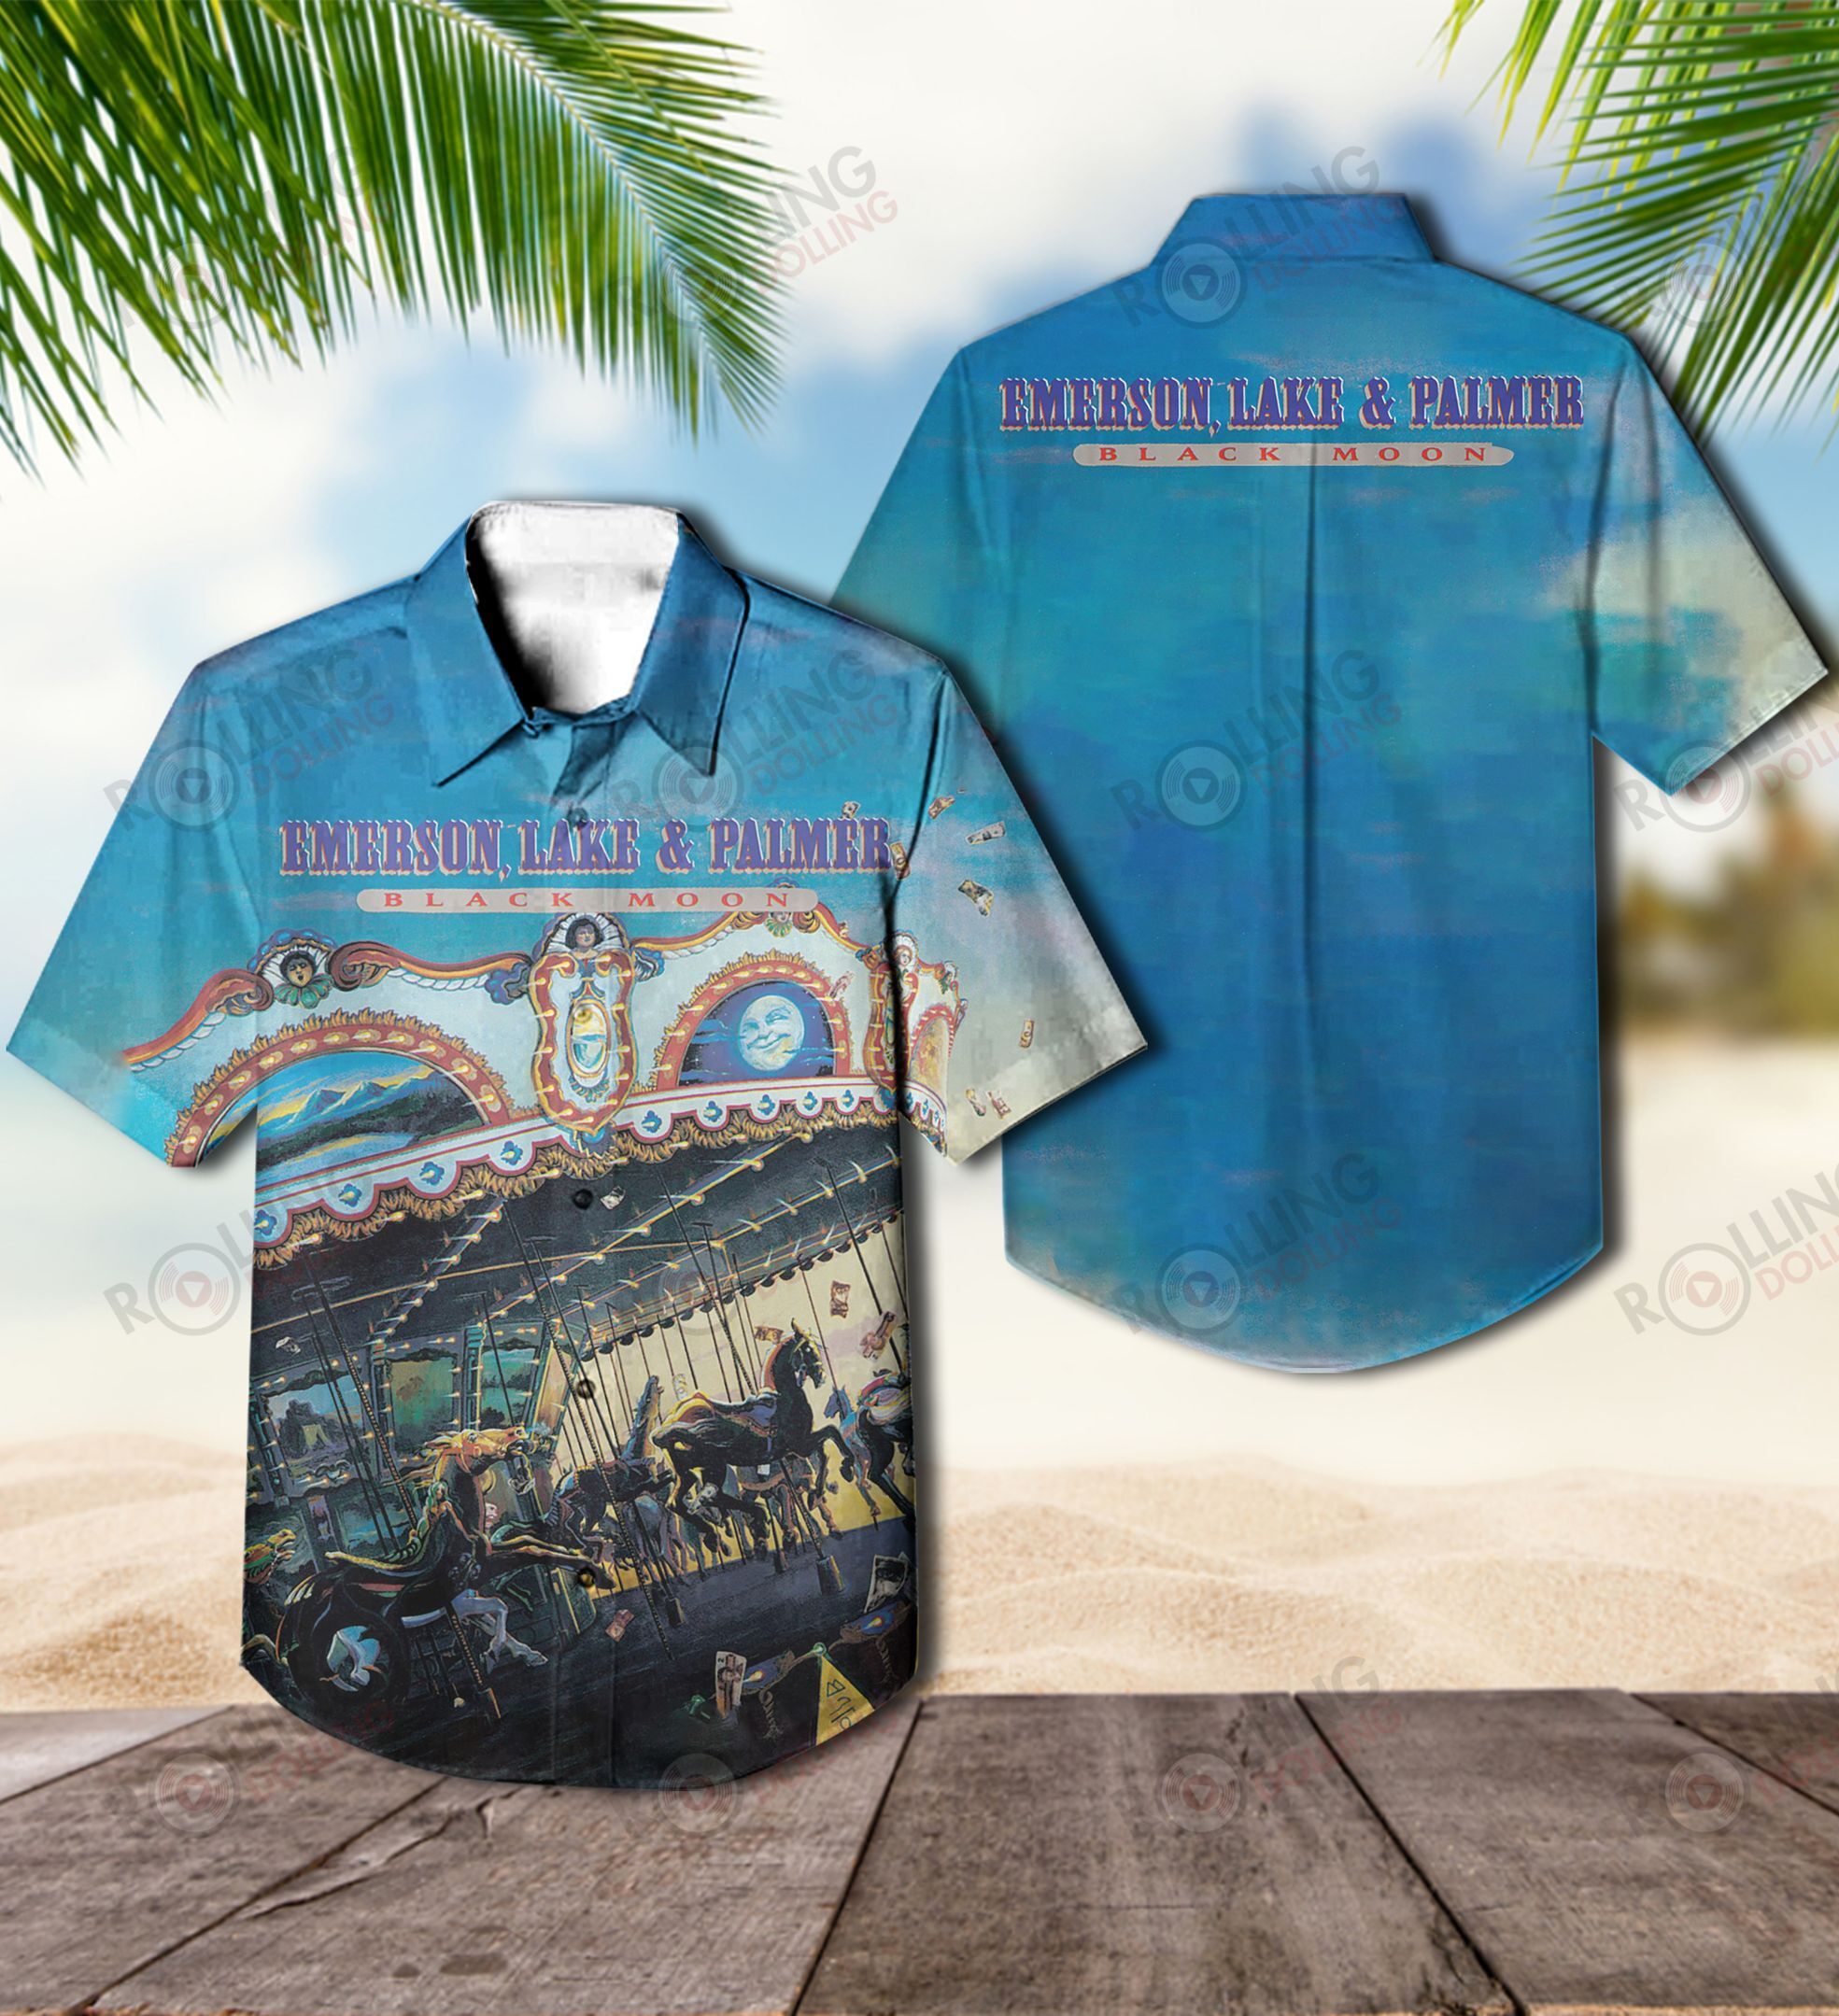 For summer, consider wearing This Amazing Hawaiian Shirt shirt in our store 63